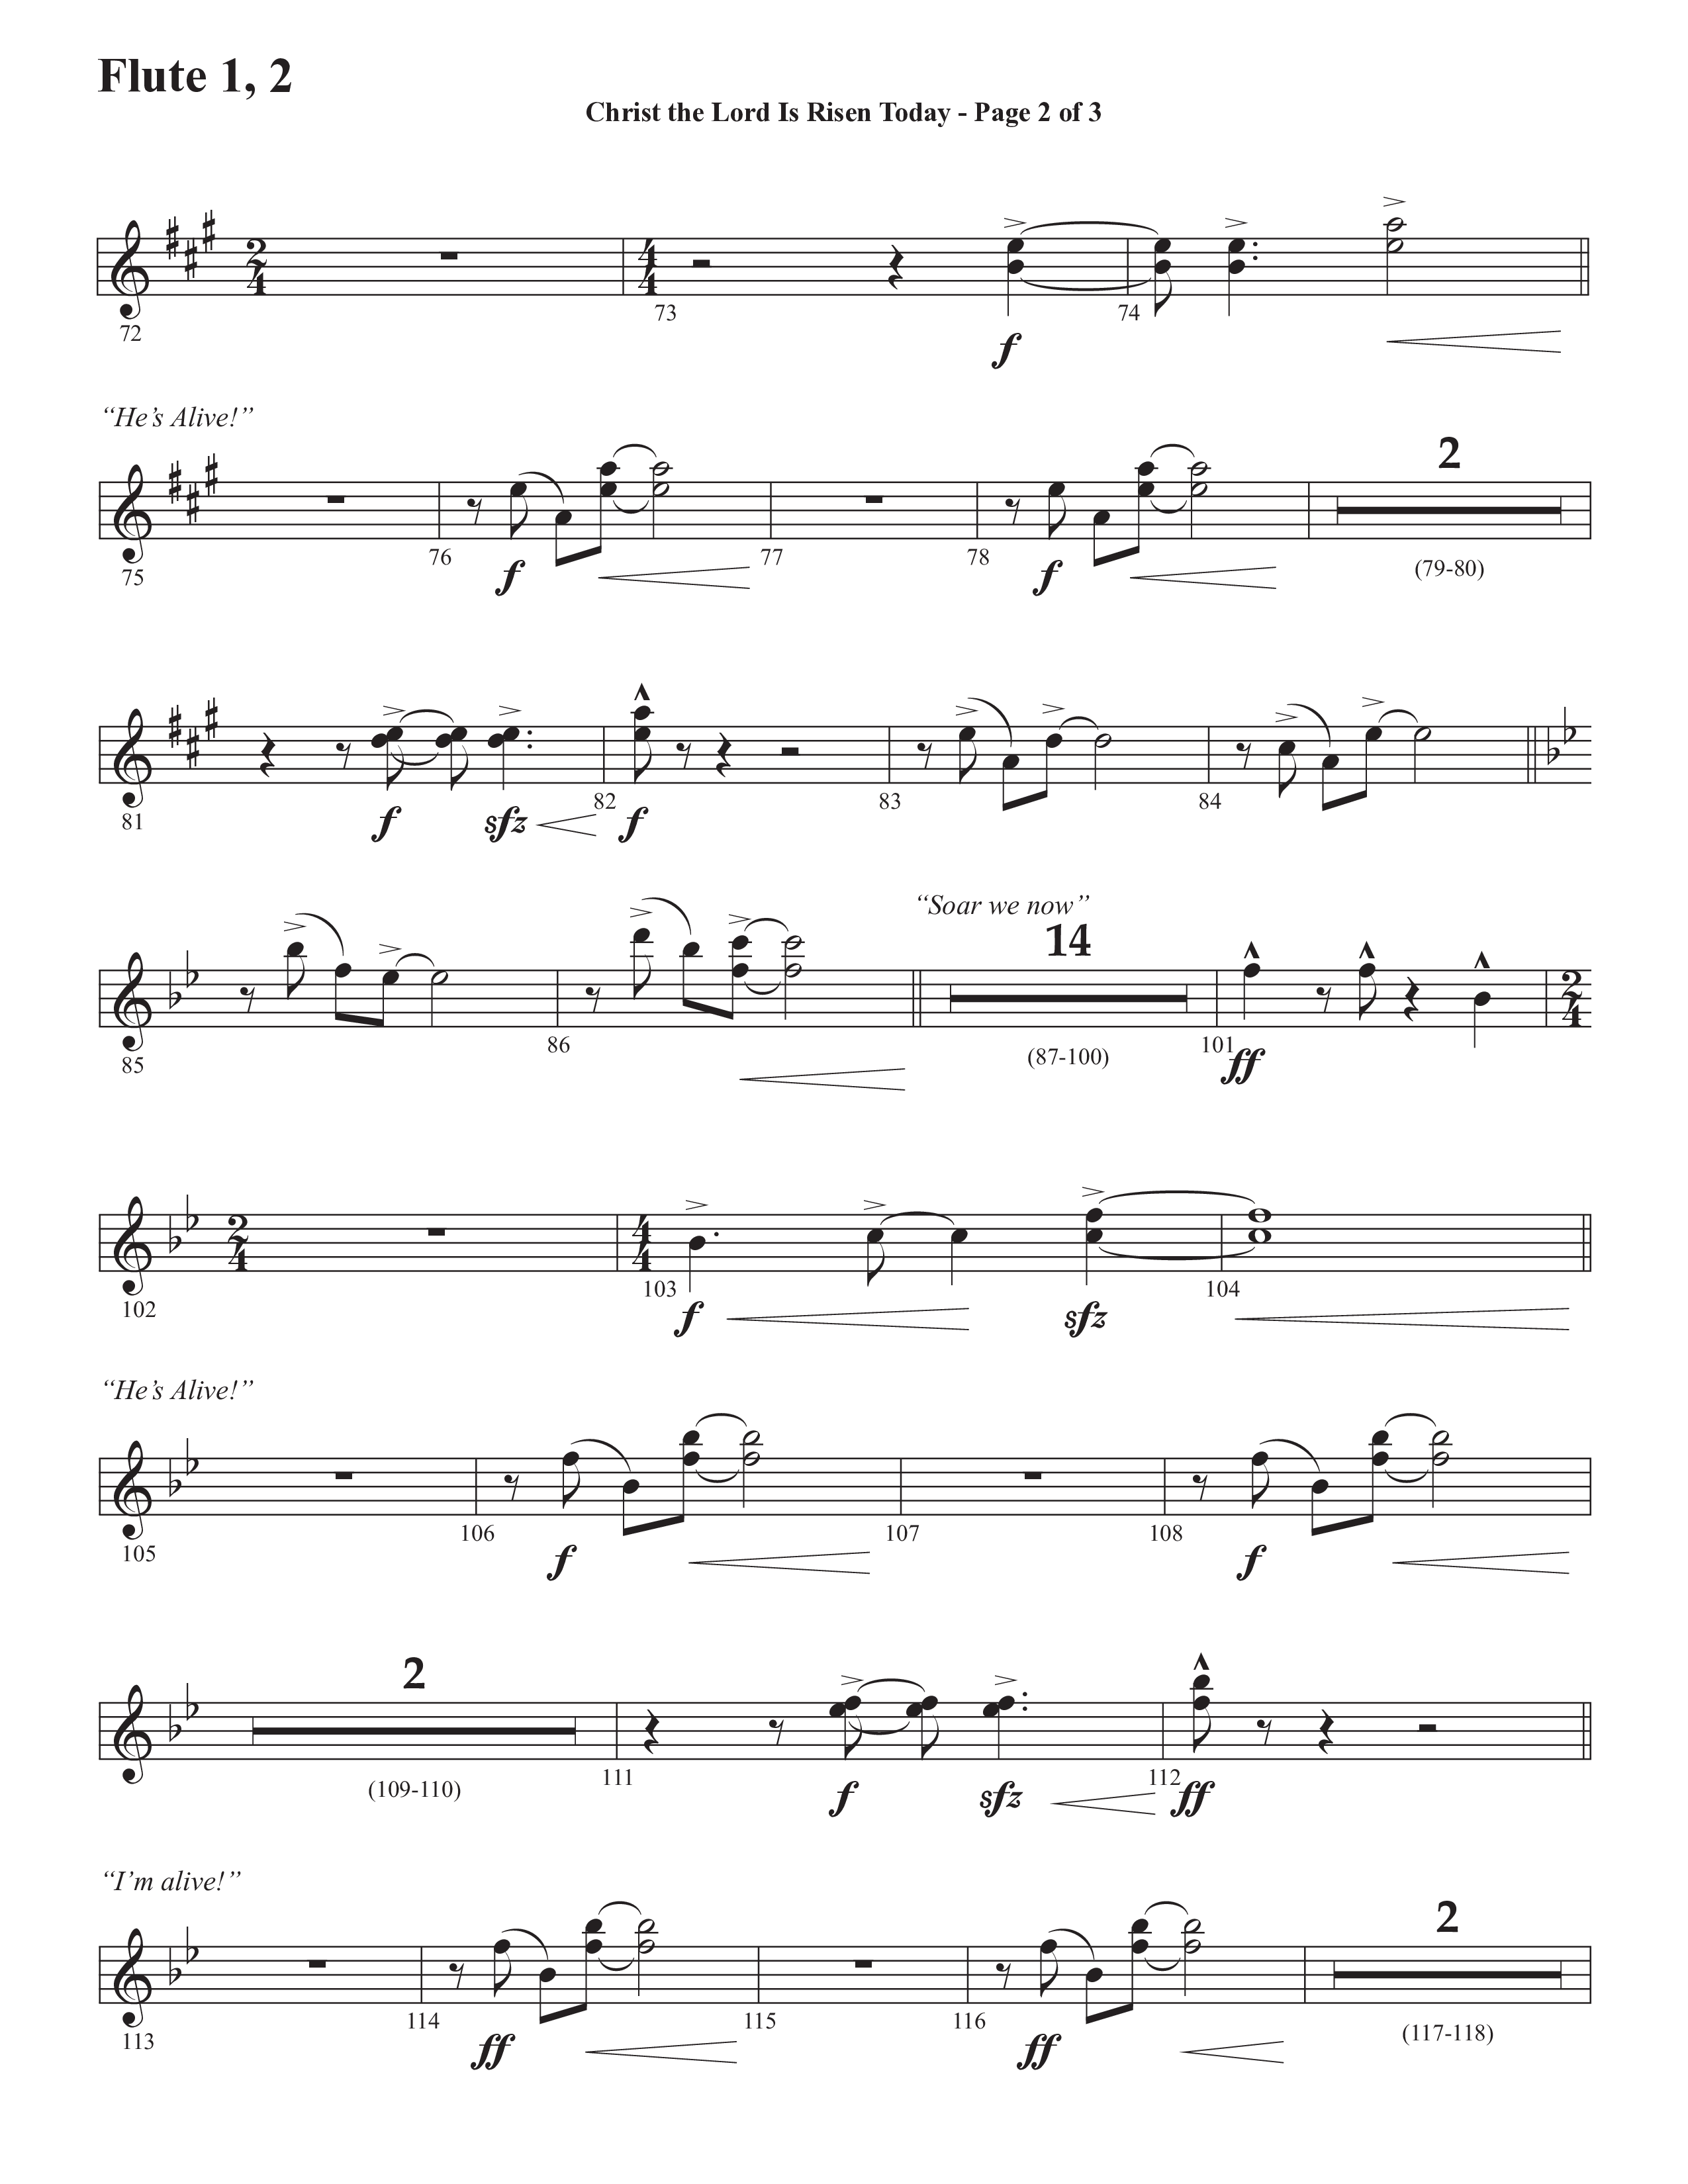 Christ The Lord Is Risen Today (He's Alive) (Choral Anthem SATB) Flute 1/2 (Semsen Music / Arr. John Bolin / Orch. Cliff Duren)